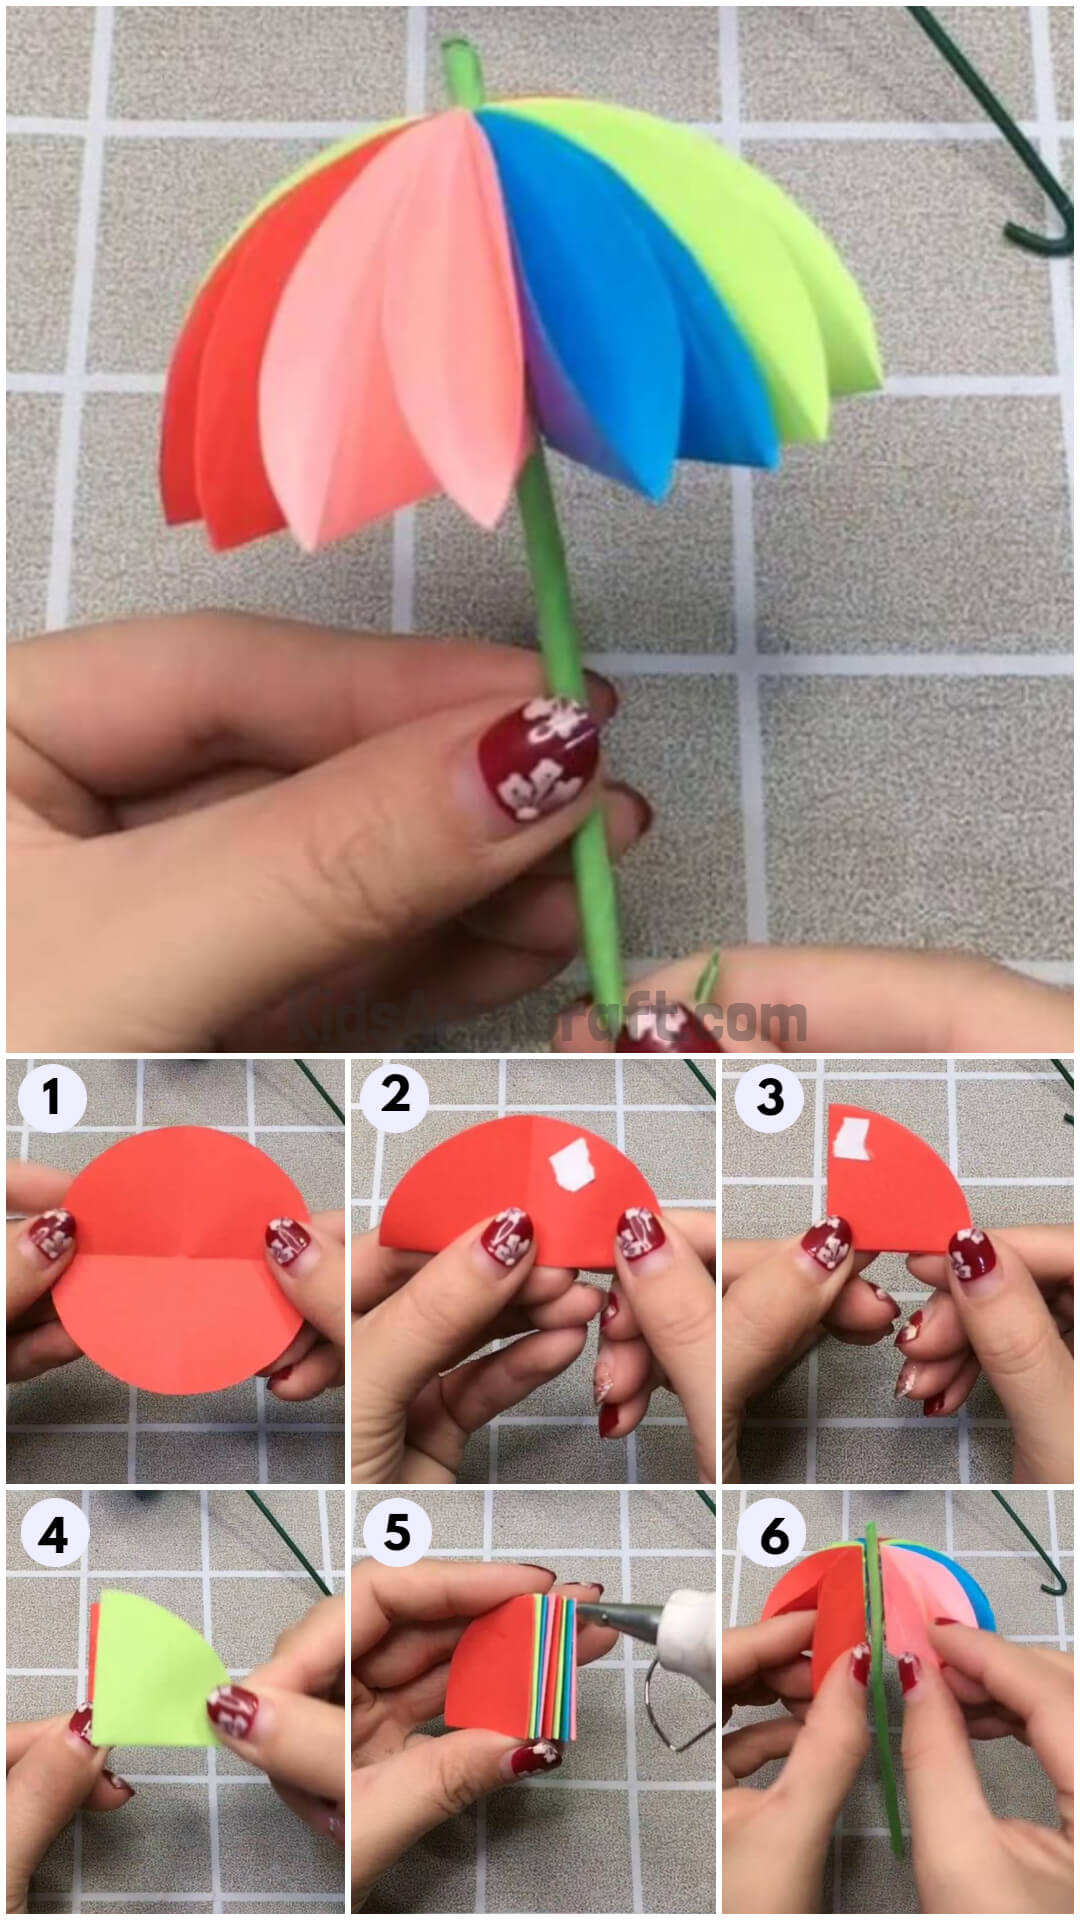 How to Create a Rainy Day Umbrella Craft with Kids - Rainy Day Umbrella Craft Tutorial For Kids